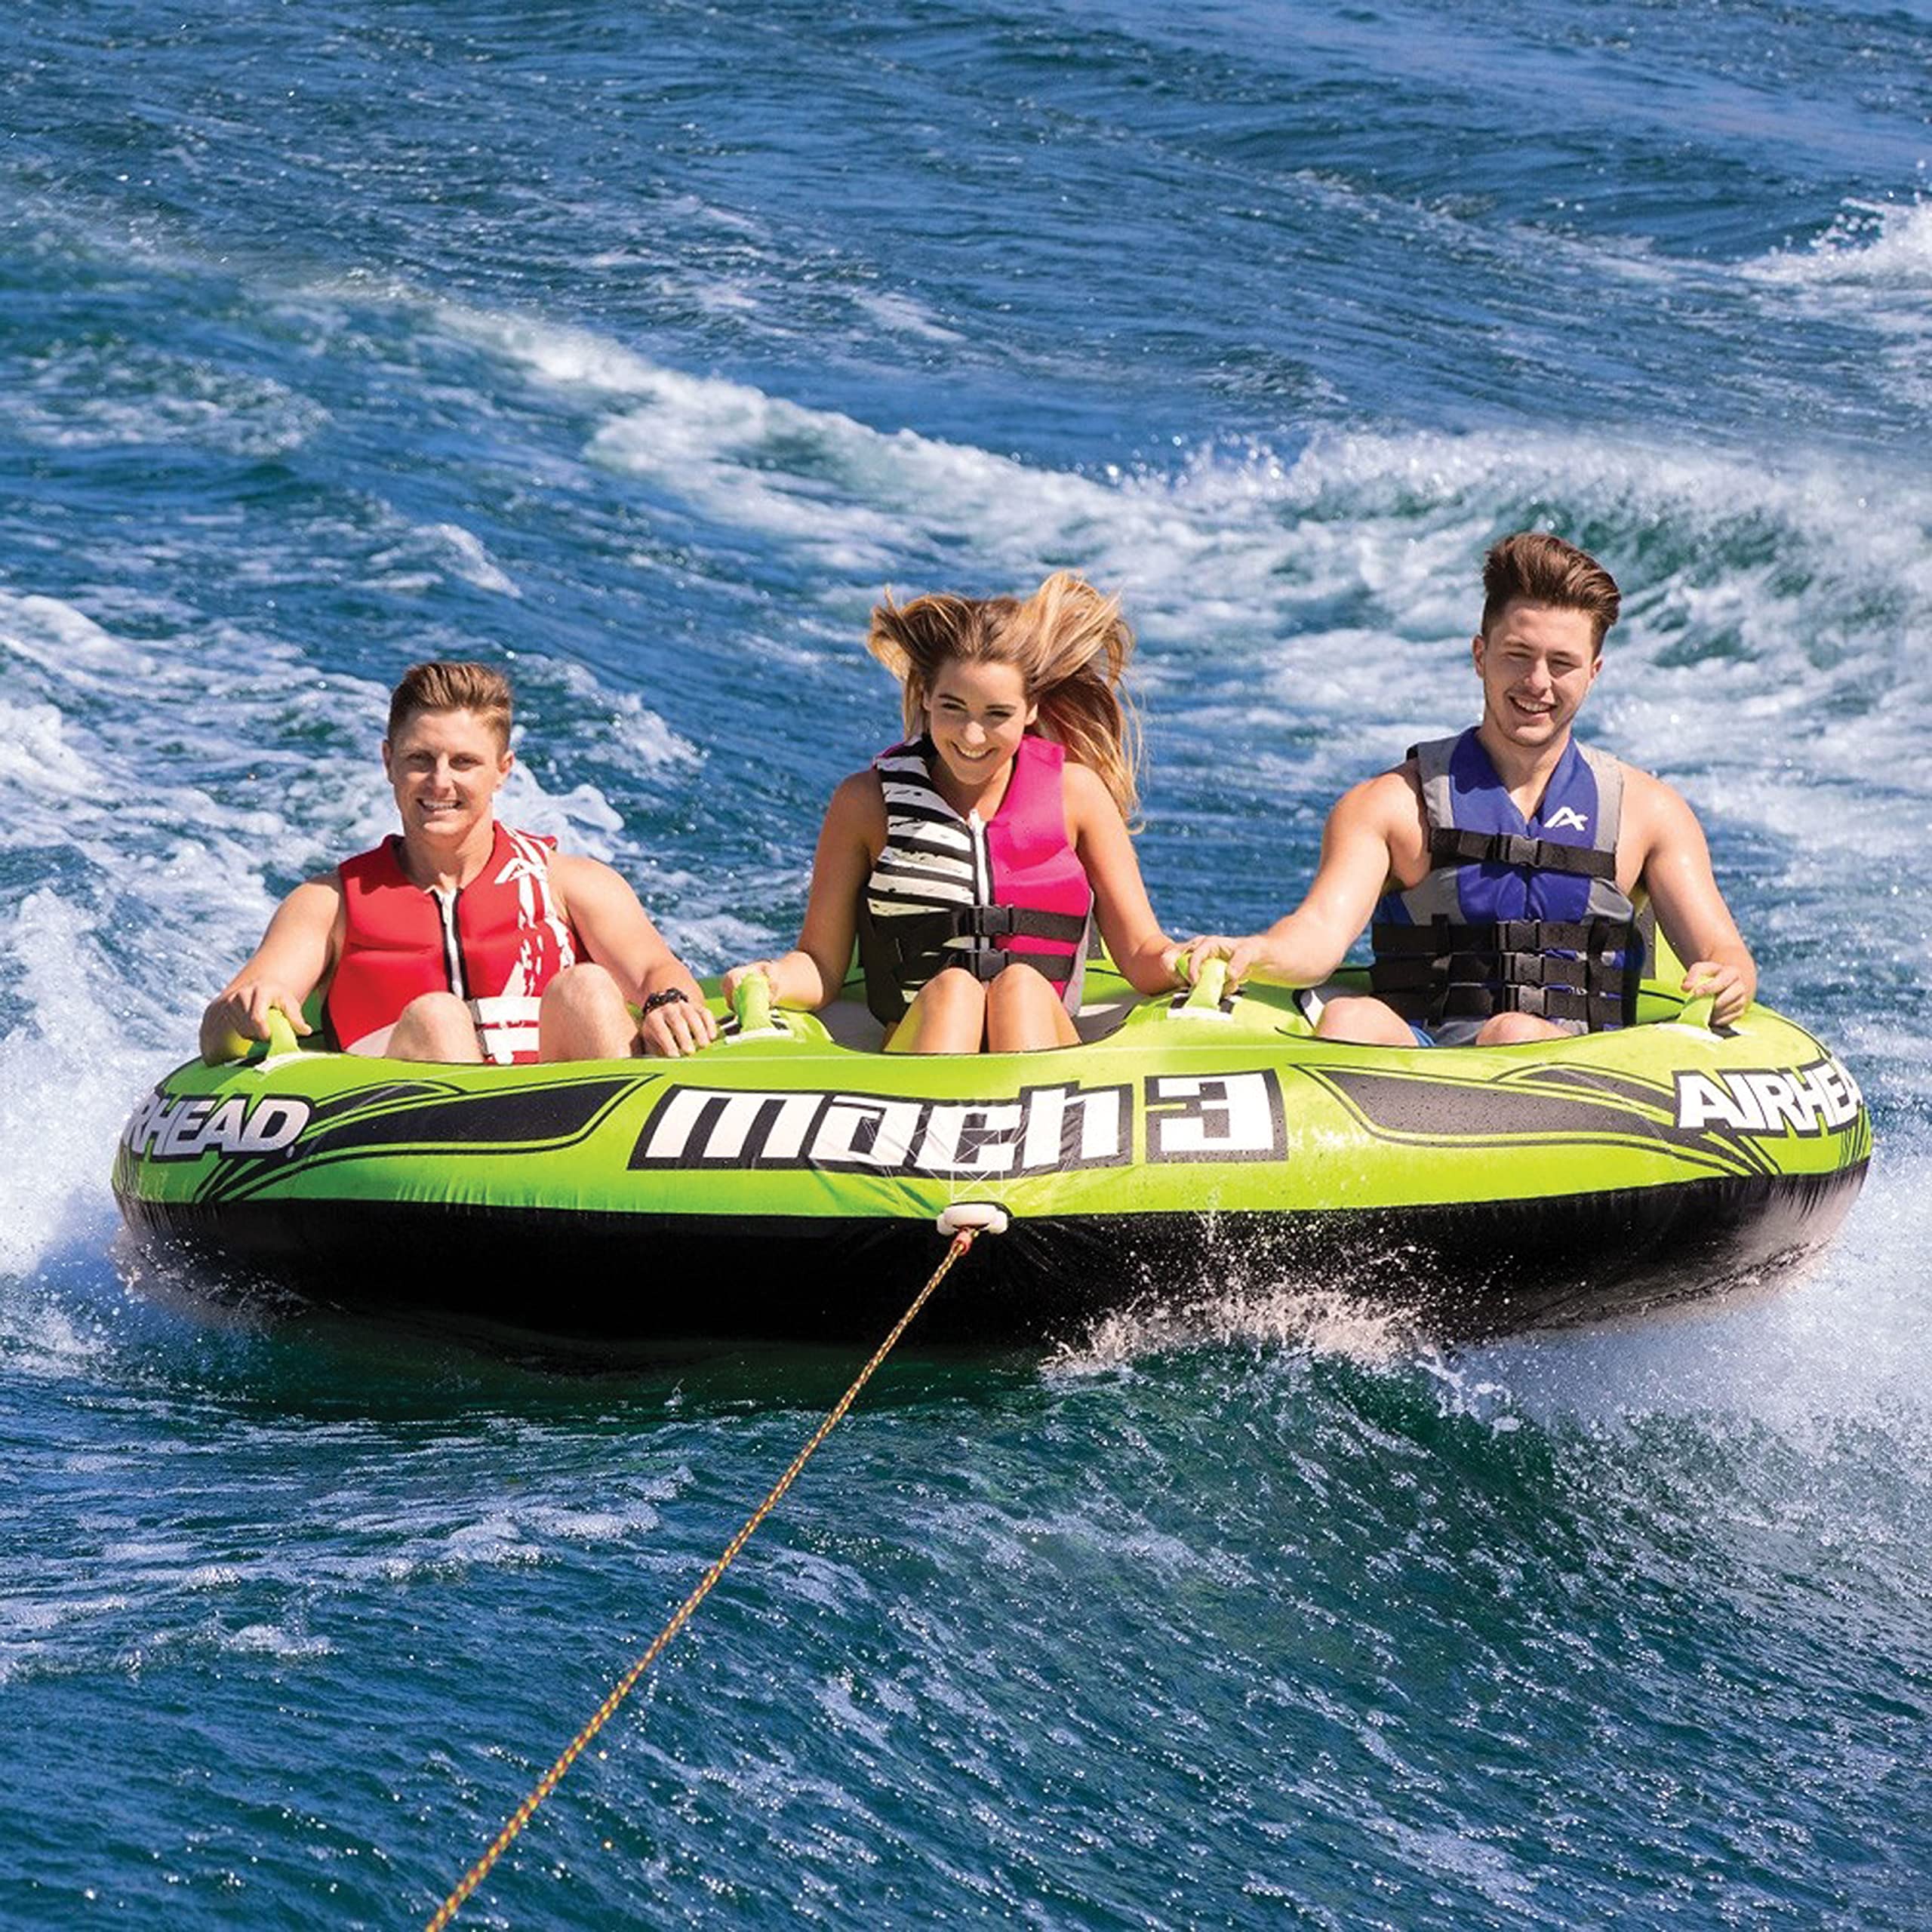 Airhead Mach | Towable Tube for Boating - 1, 2, and 3 Rider Sizes ,Green/White